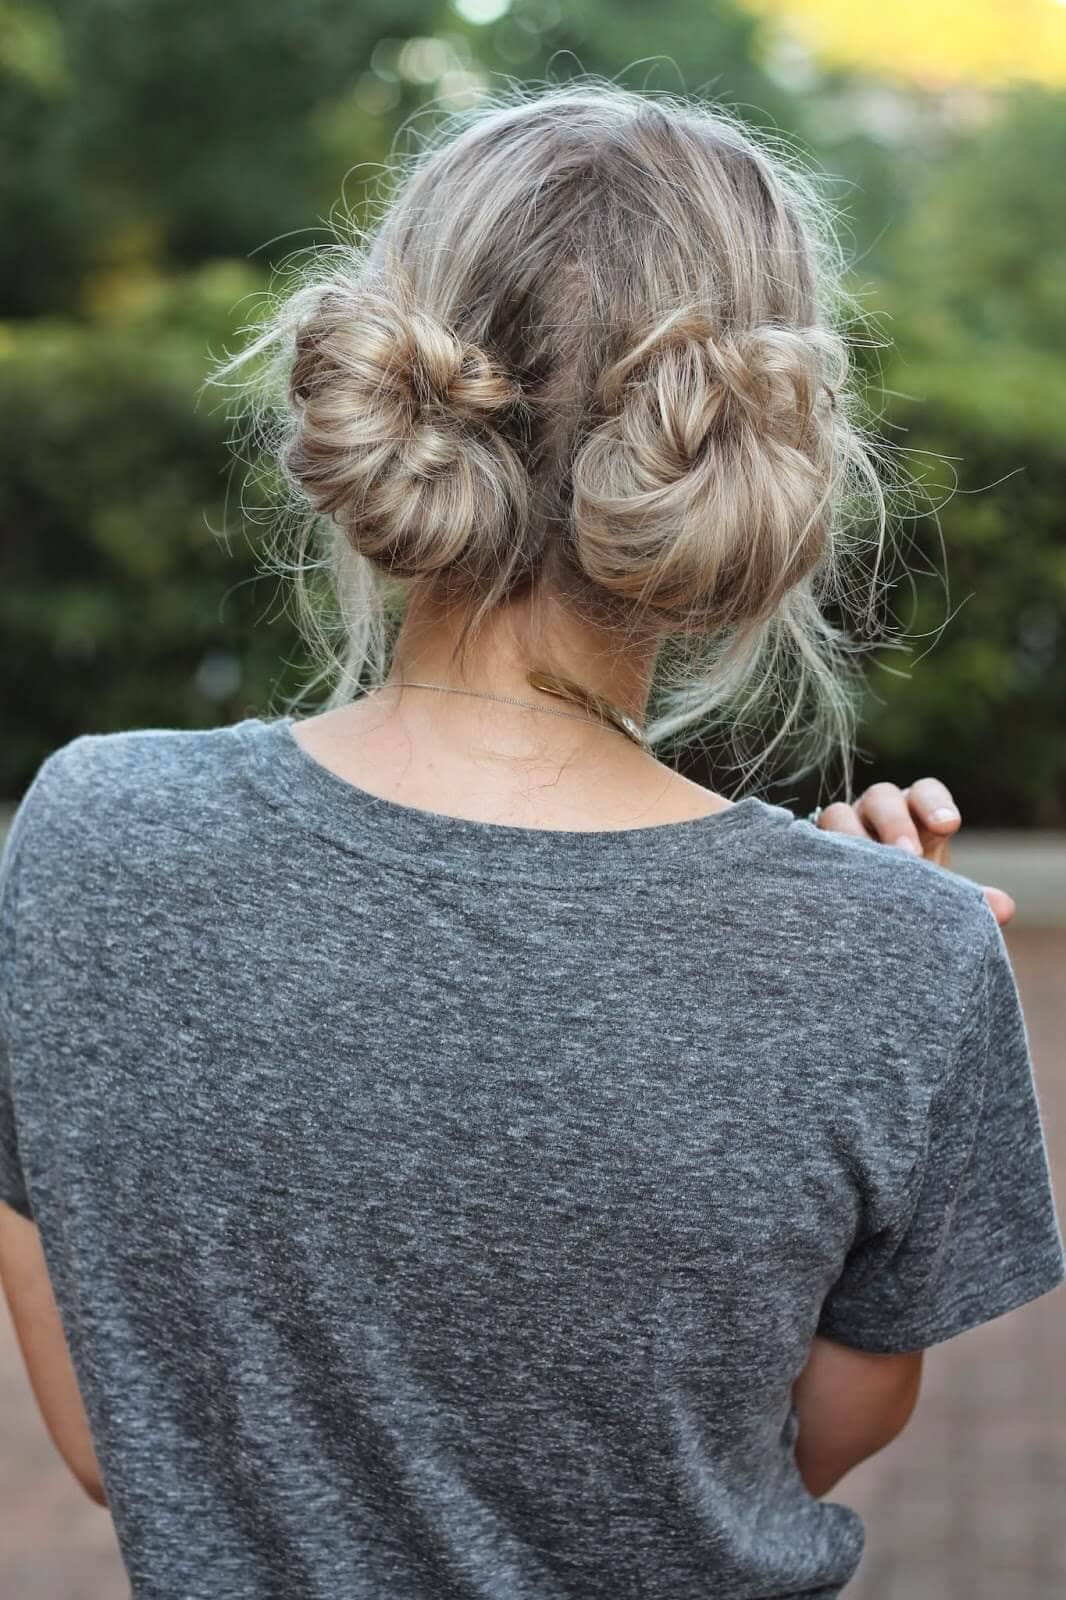 Cool Messy Two Buns Hairstyle